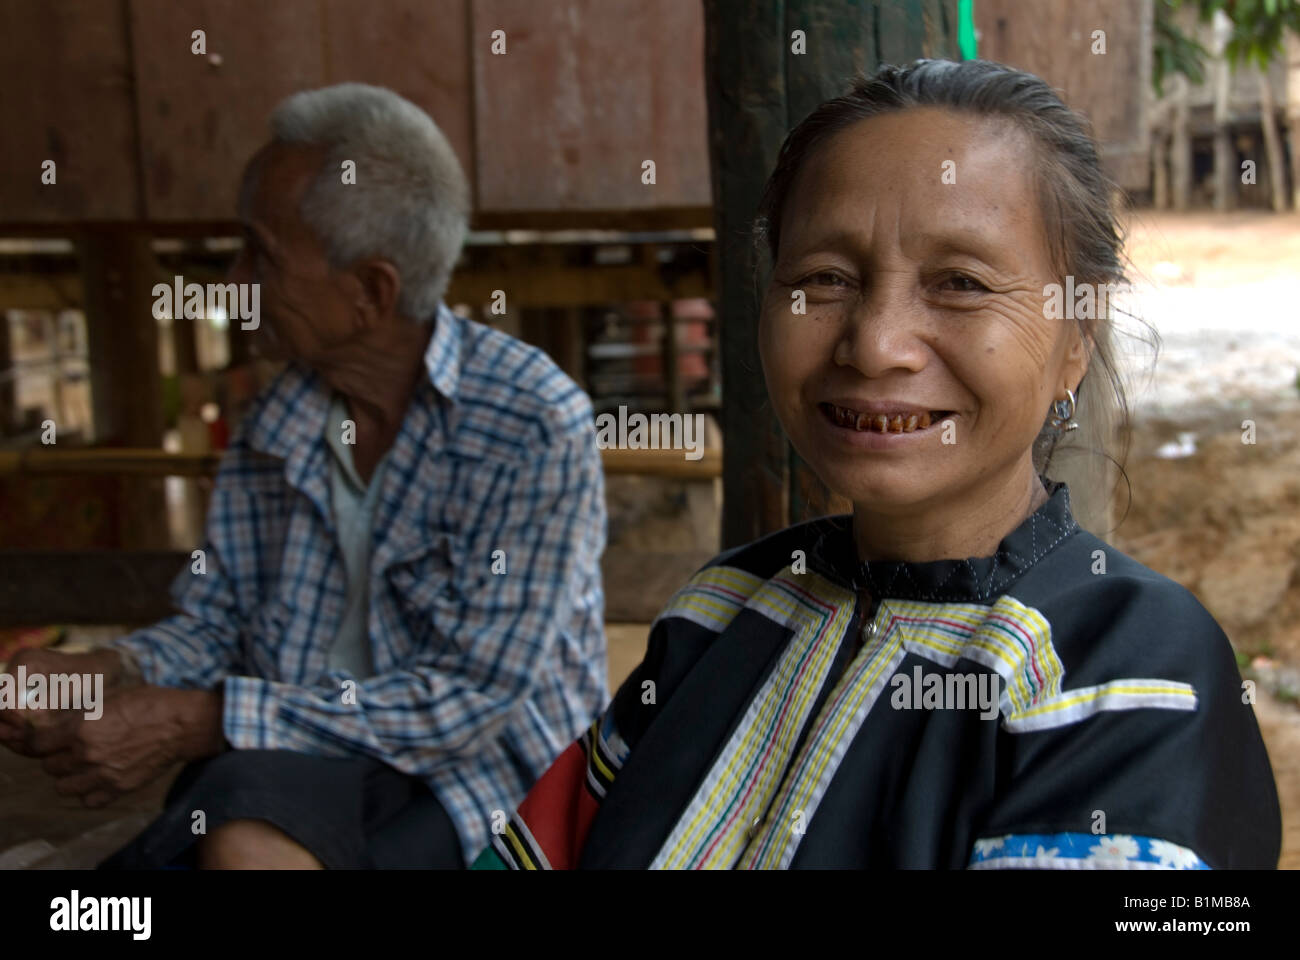 Older Lahu Hill Tribe Man And Woman In A Village In North Thailand Stock Photo Alamy